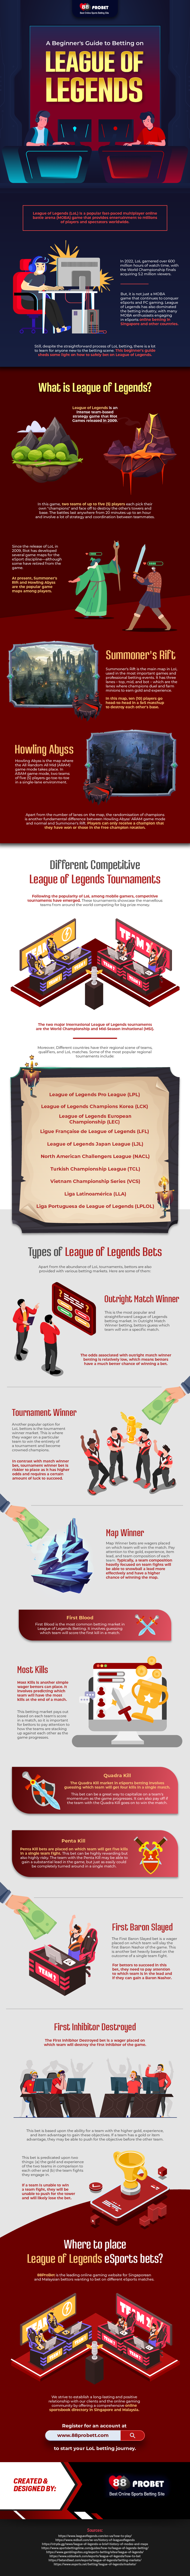 A-Beginner's-Guide-to-Betting-on-League-of-Legends-dakwd123